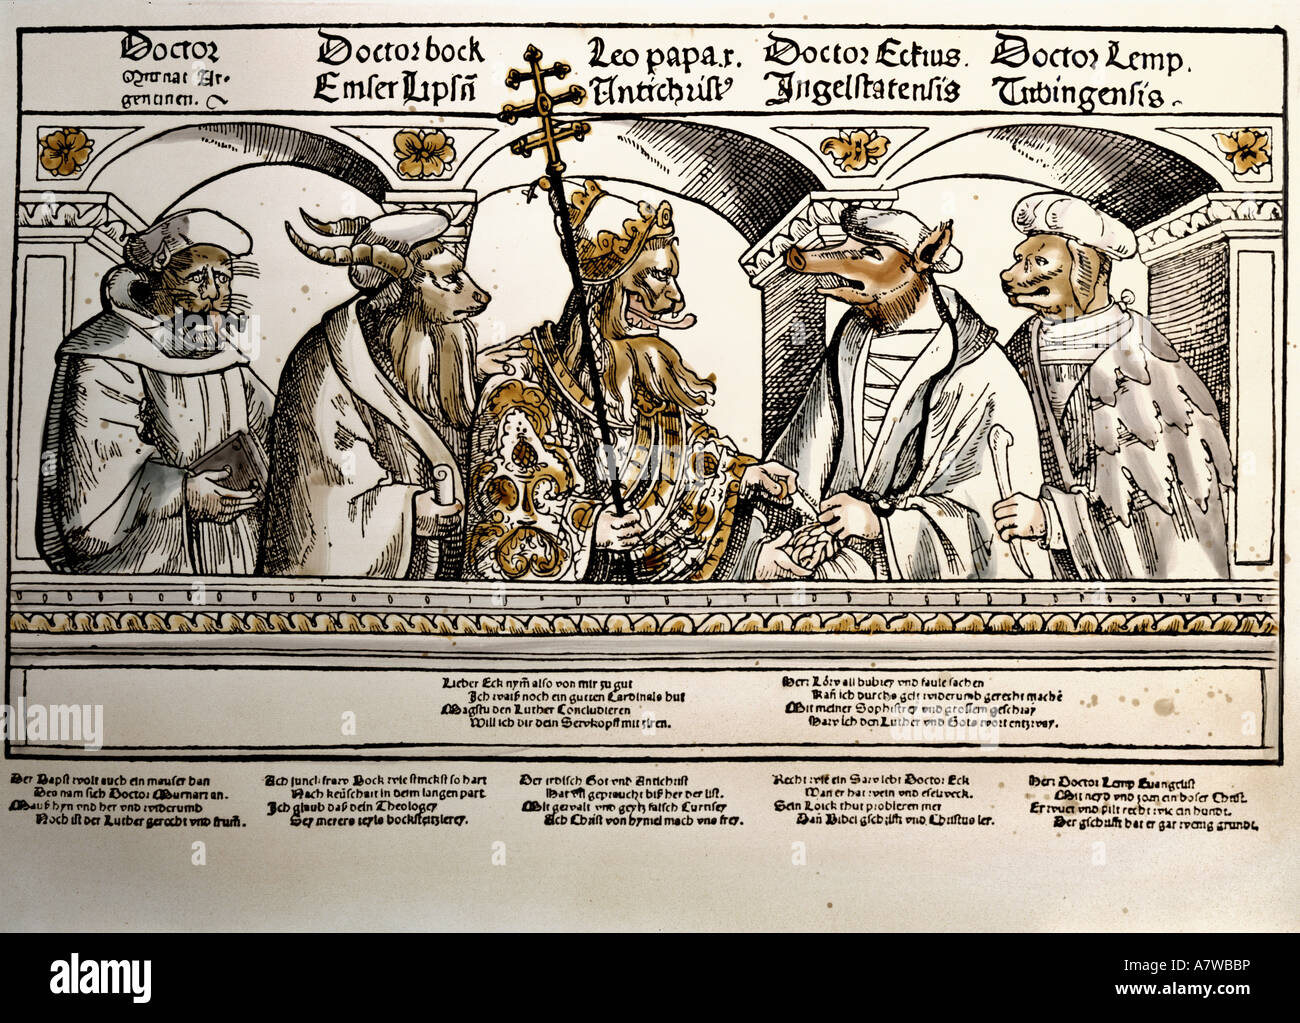 event, reformation 1517 - 1555, caricature, pope and theologians, woodcut, Nuremberg, circa 1520, private collection, Thomas Murner as cat, Emser as goat, Pope Leo X as antichrist, Johannes Eck as dog, Lempp as pig, religion, christianity, protestant satire, catholicism, broadsheet, propaganda, Germany, 16th century, historic, historical, people, Stock Photo